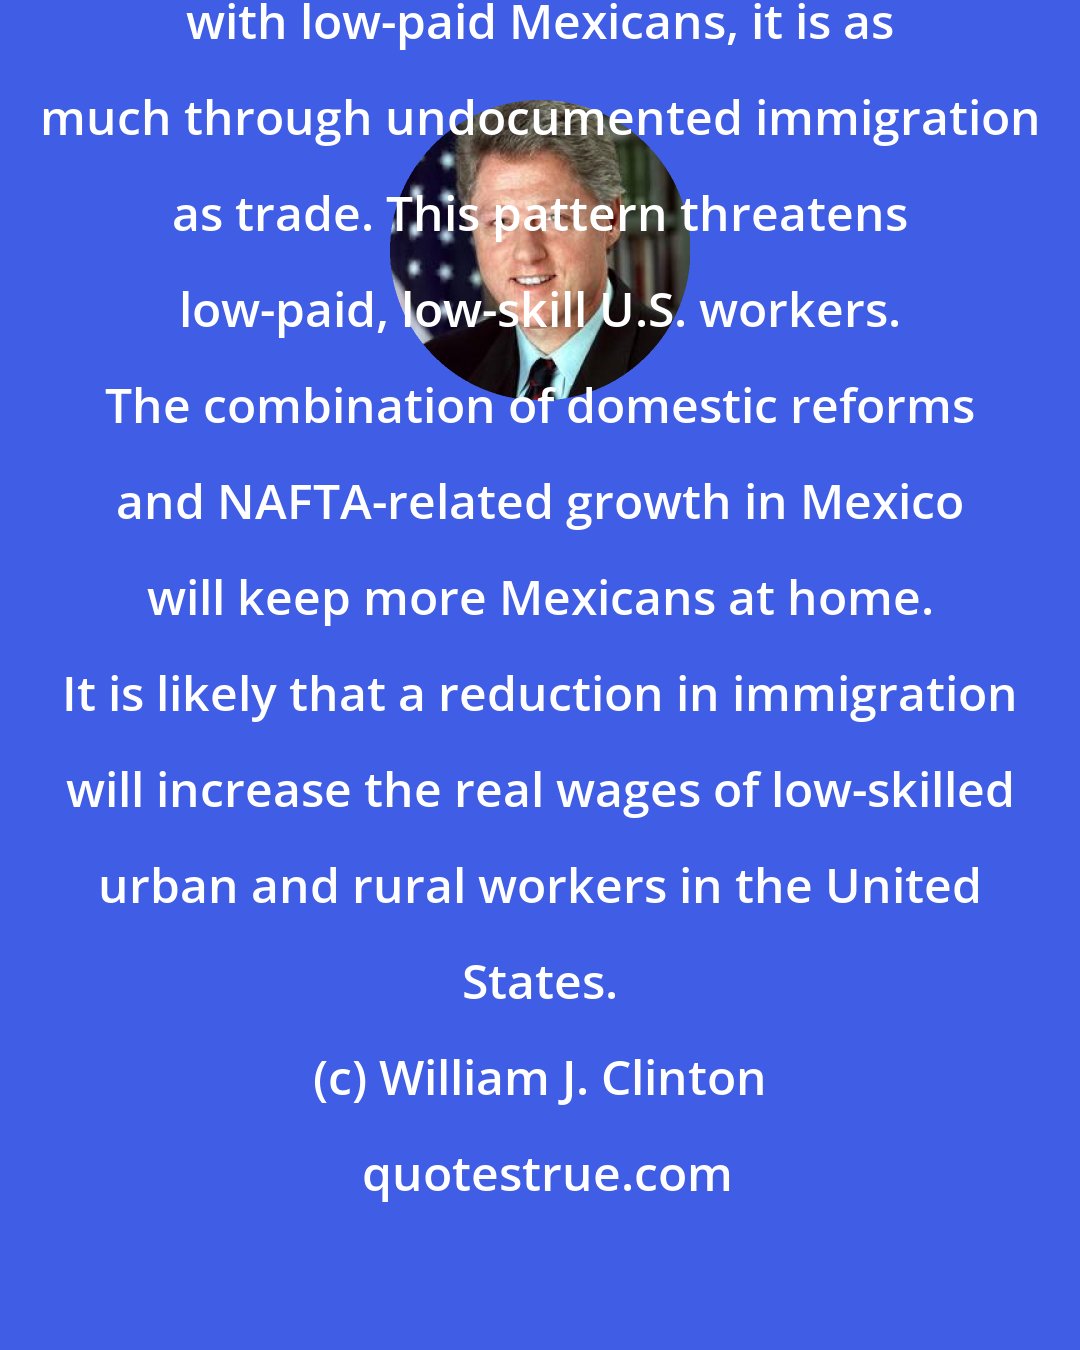 William J. Clinton: To the extent that our workers compete with low-paid Mexicans, it is as much through undocumented immigration as trade. This pattern threatens low-paid, low-skill U.S. workers. The combination of domestic reforms and NAFTA-related growth in Mexico will keep more Mexicans at home. It is likely that a reduction in immigration will increase the real wages of low-skilled urban and rural workers in the United States.